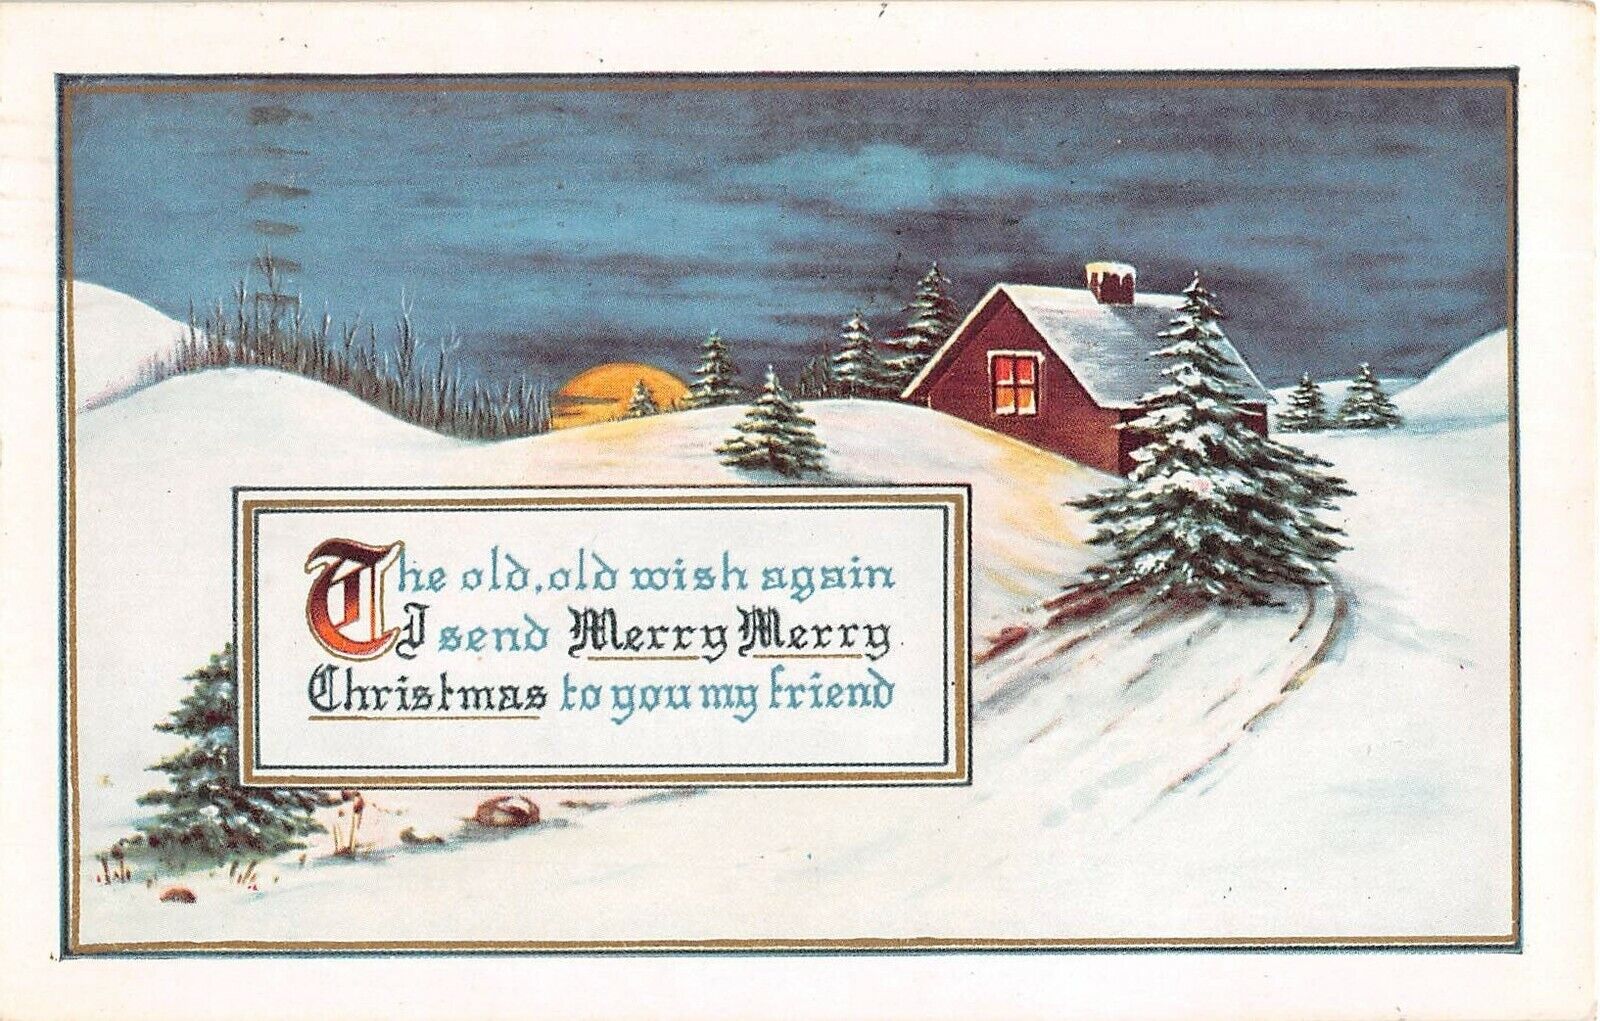 Moon Rising Over Snowy Hill by Winter Home Scene on 1919 Whitney Christmas PC